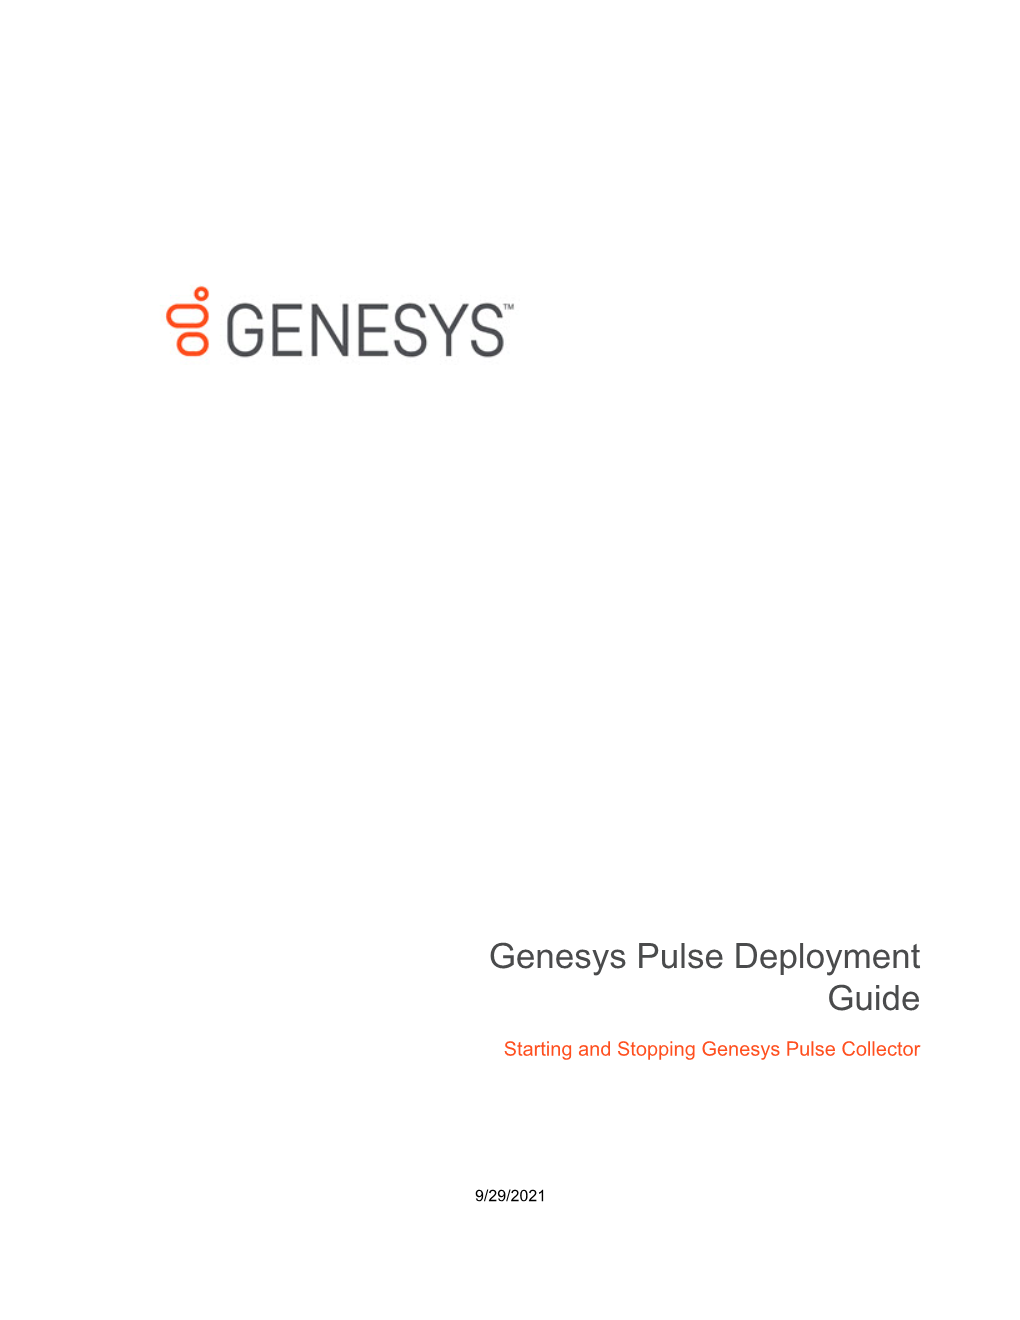 Genesys Pulse Deployment Guide